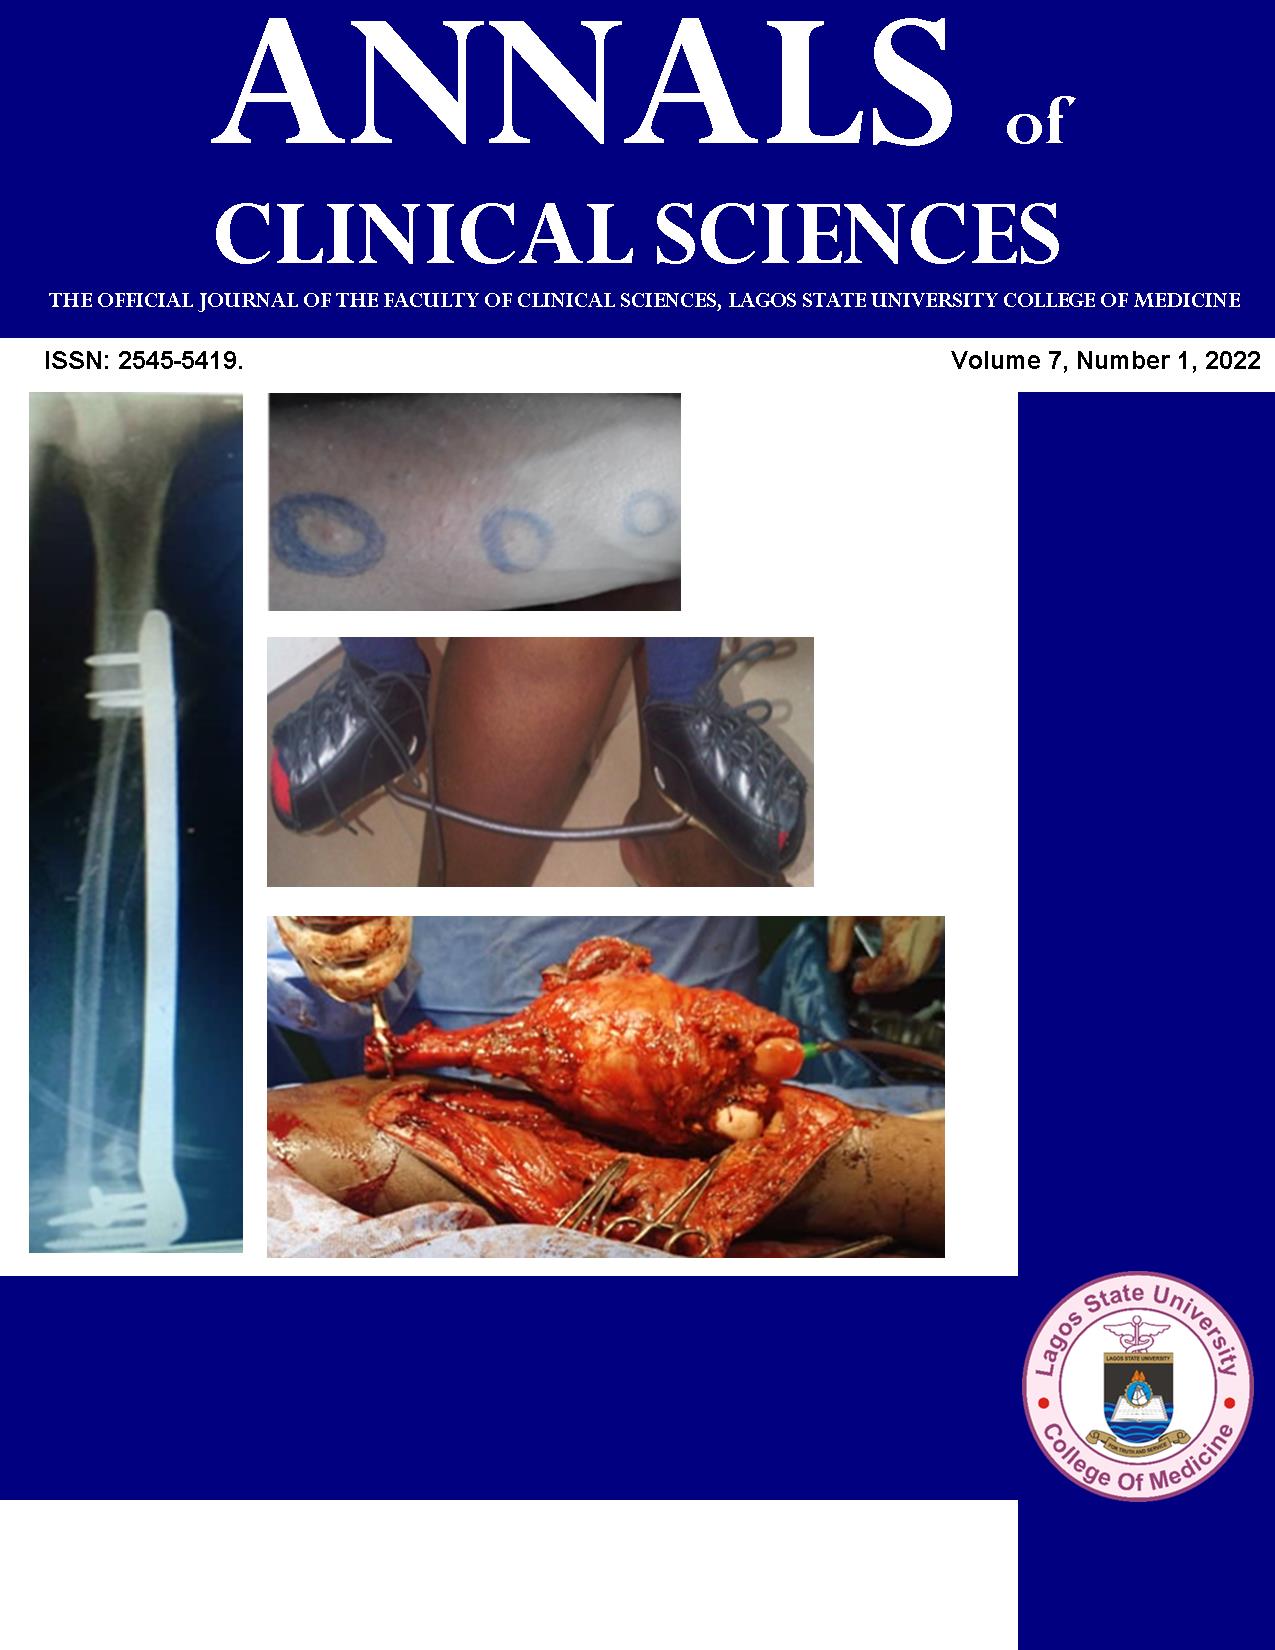 					View Vol. 7 No. 1 (2022): Annals of Clinical Sciences
				